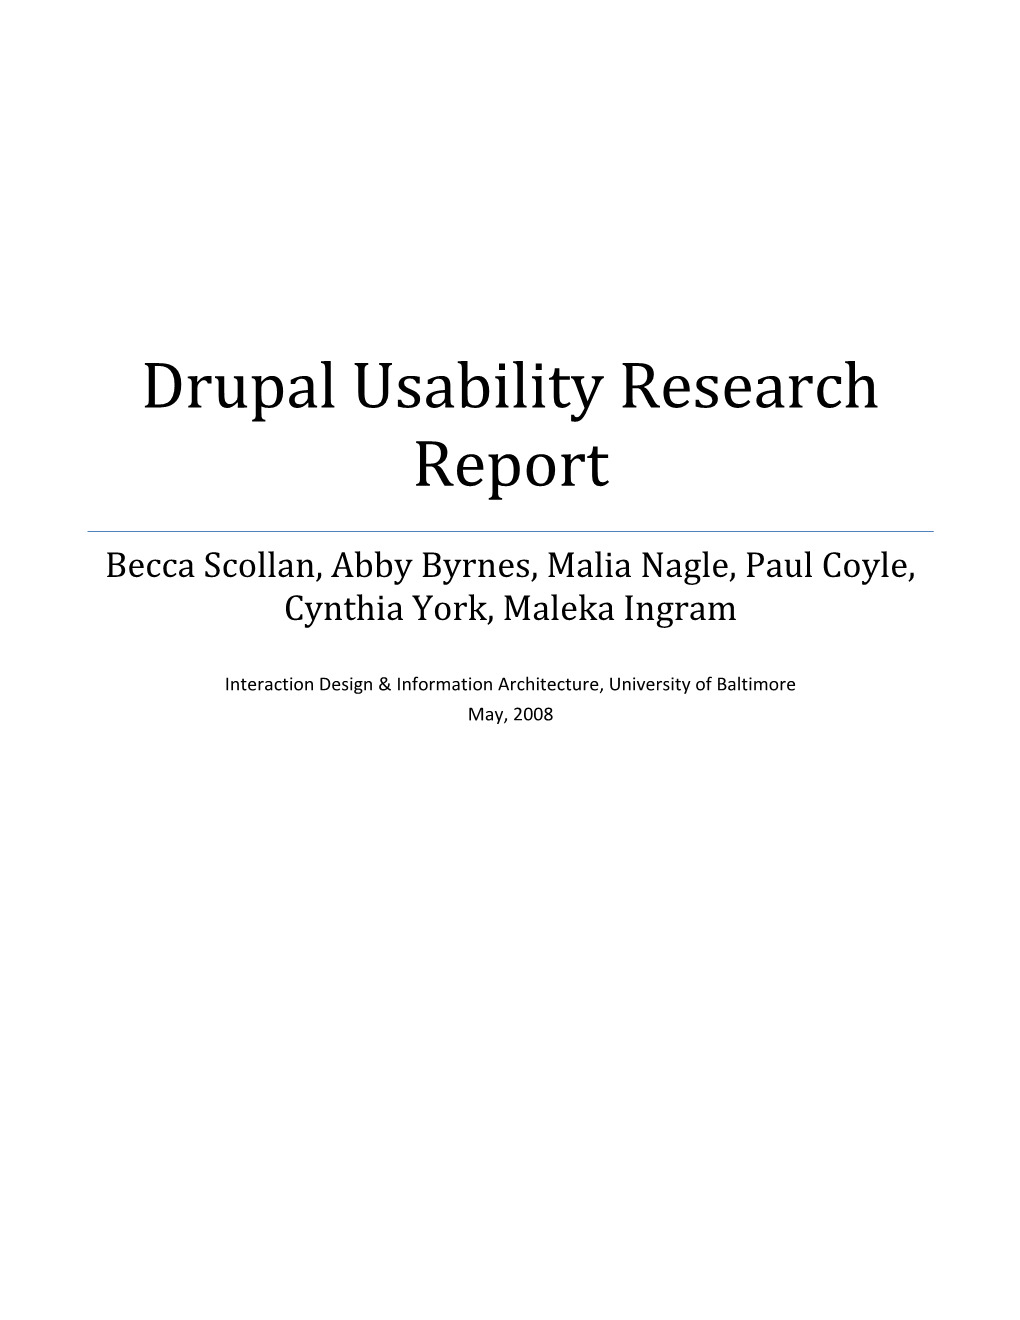 Drupal Usability Research Report